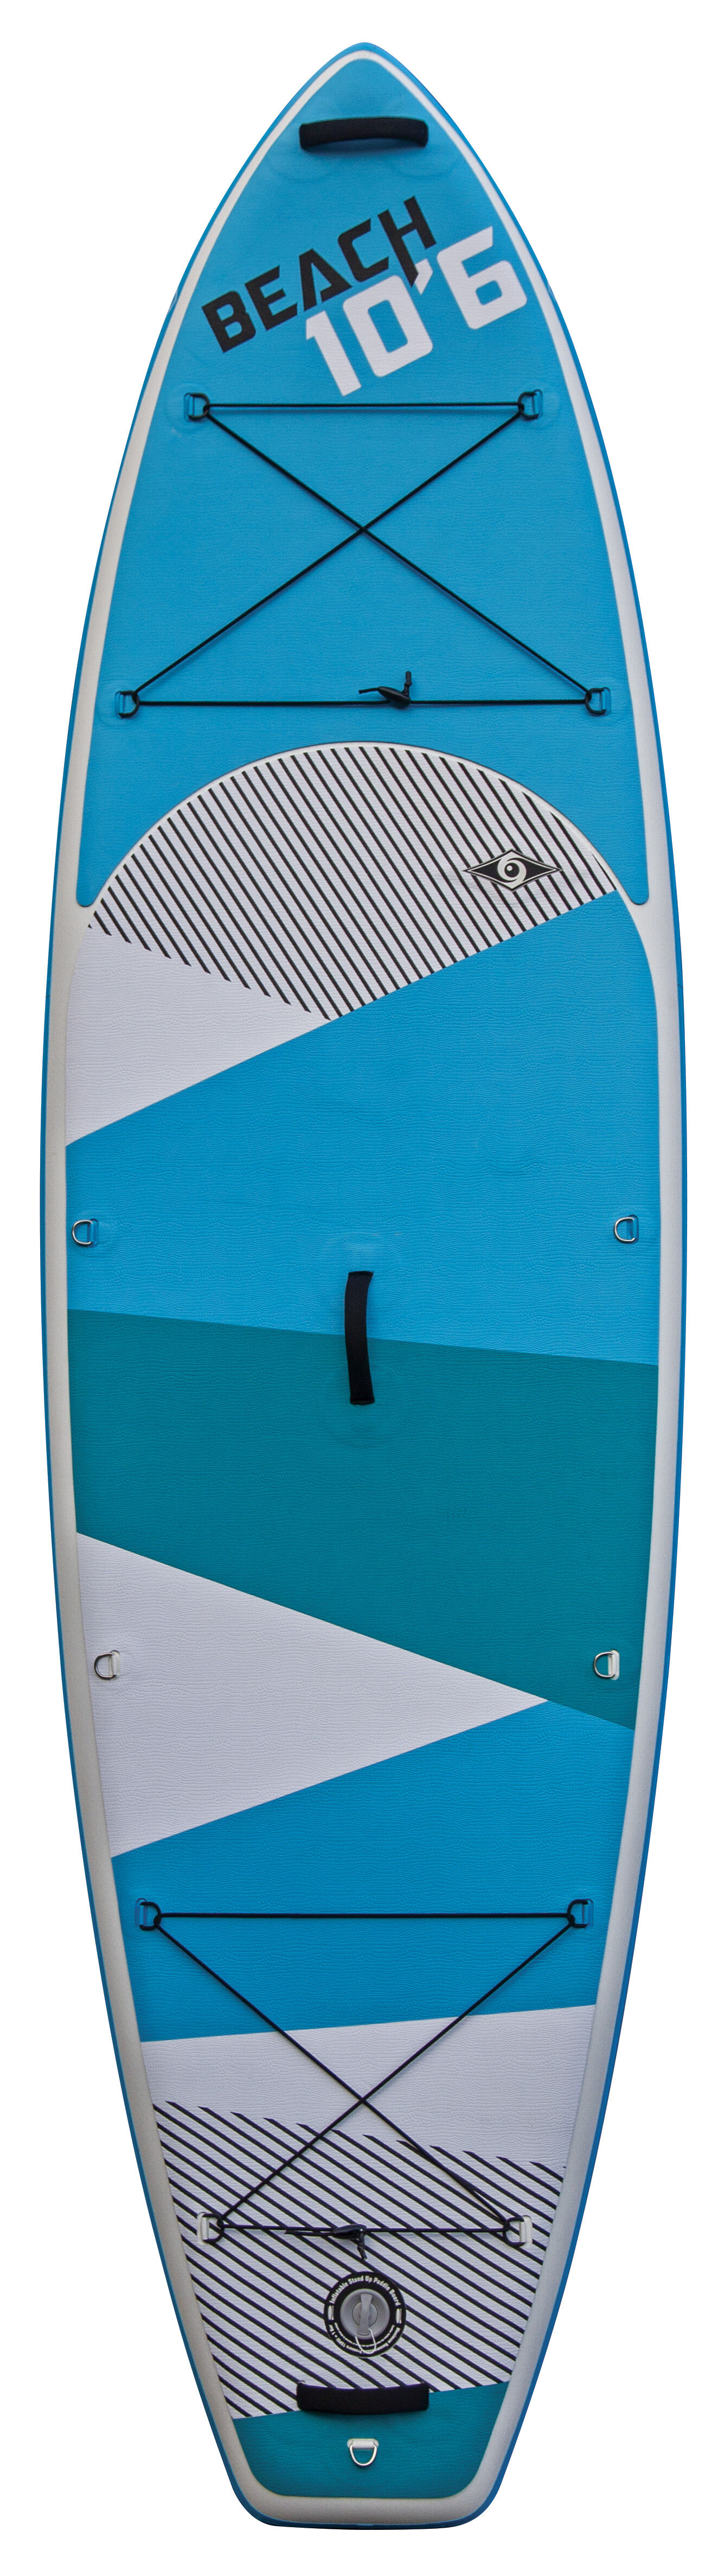 Tahe Outdoor 10'6 Sup Air Beach Pack - Stand up paddle gonflable | Hardloop